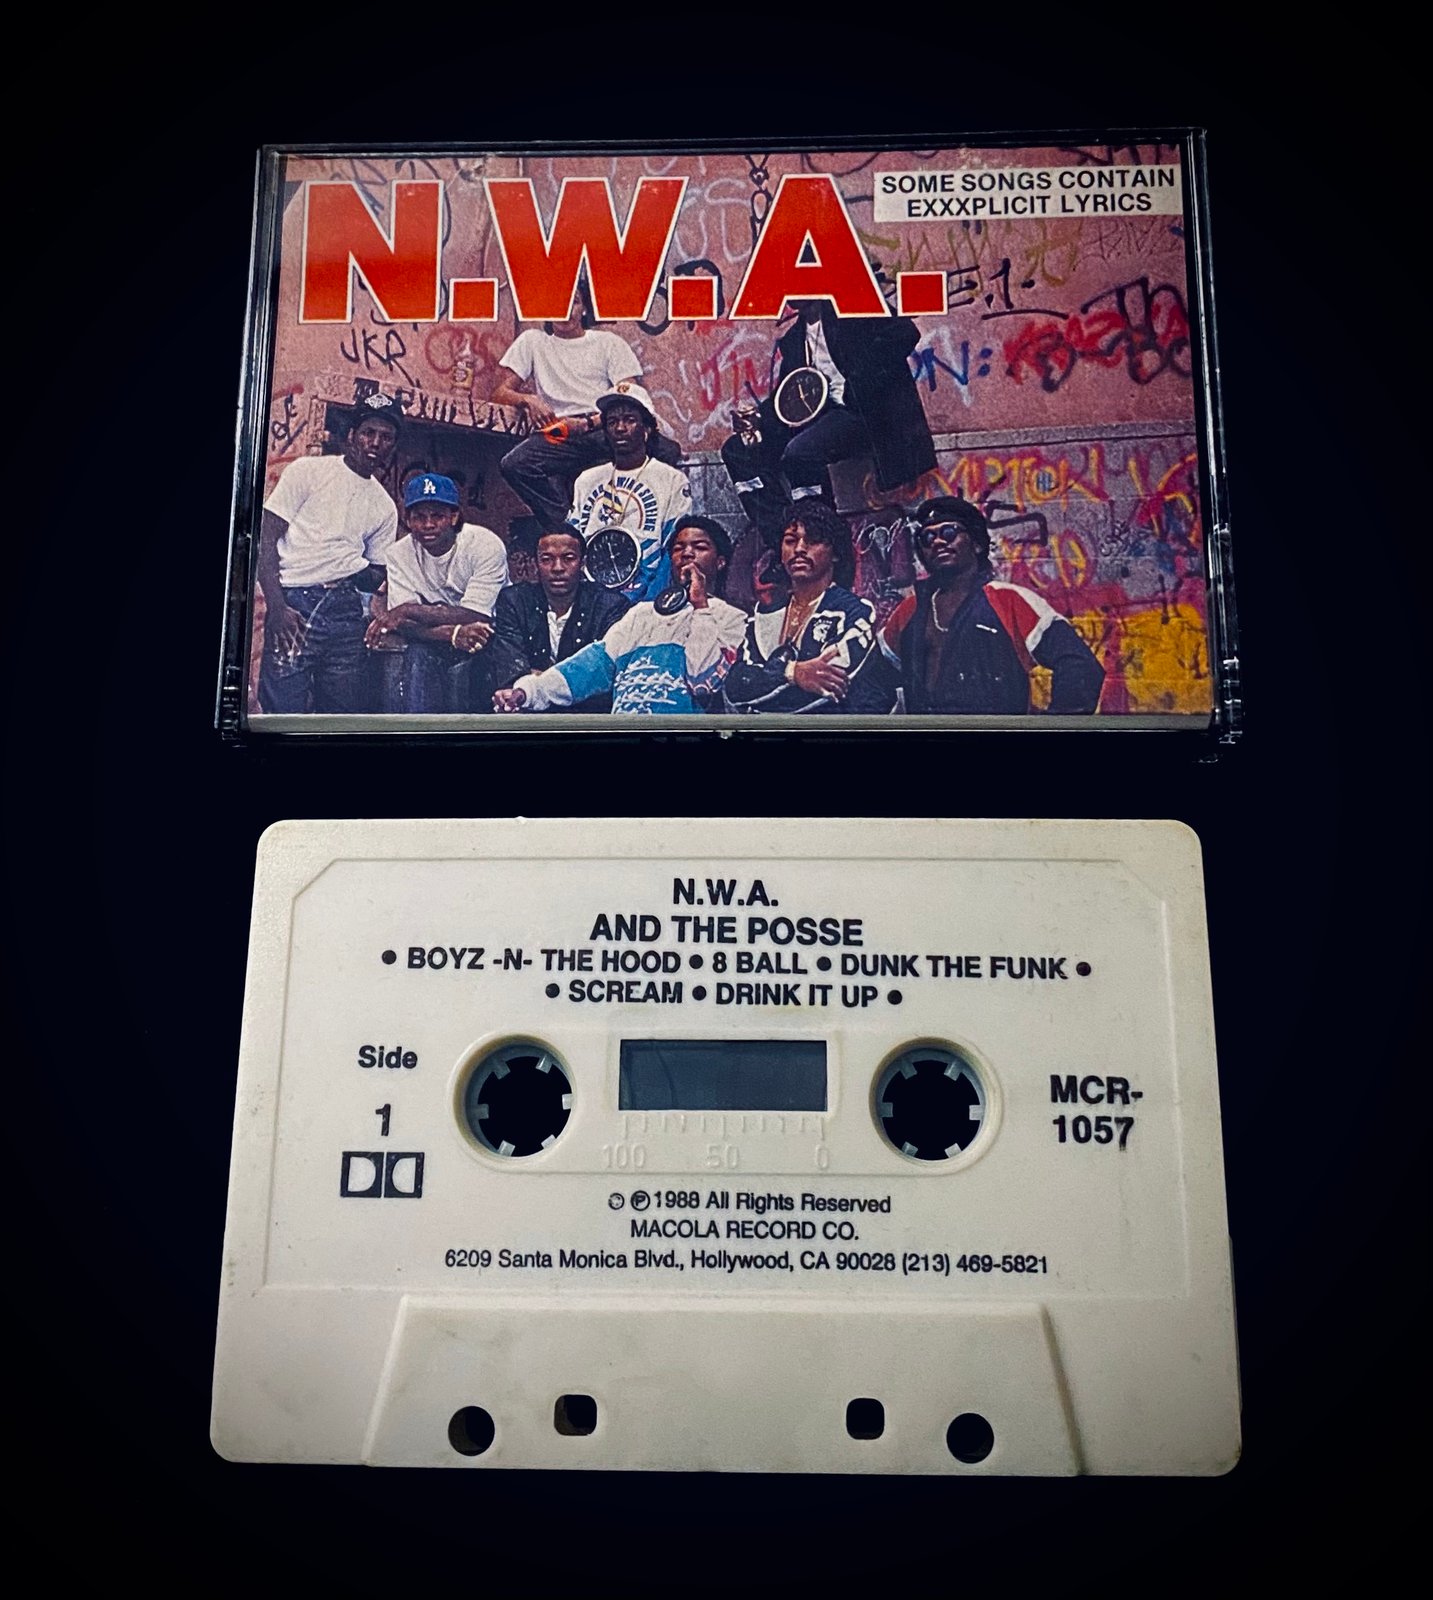 N.W.A. “And the posse” | Throwdown Records